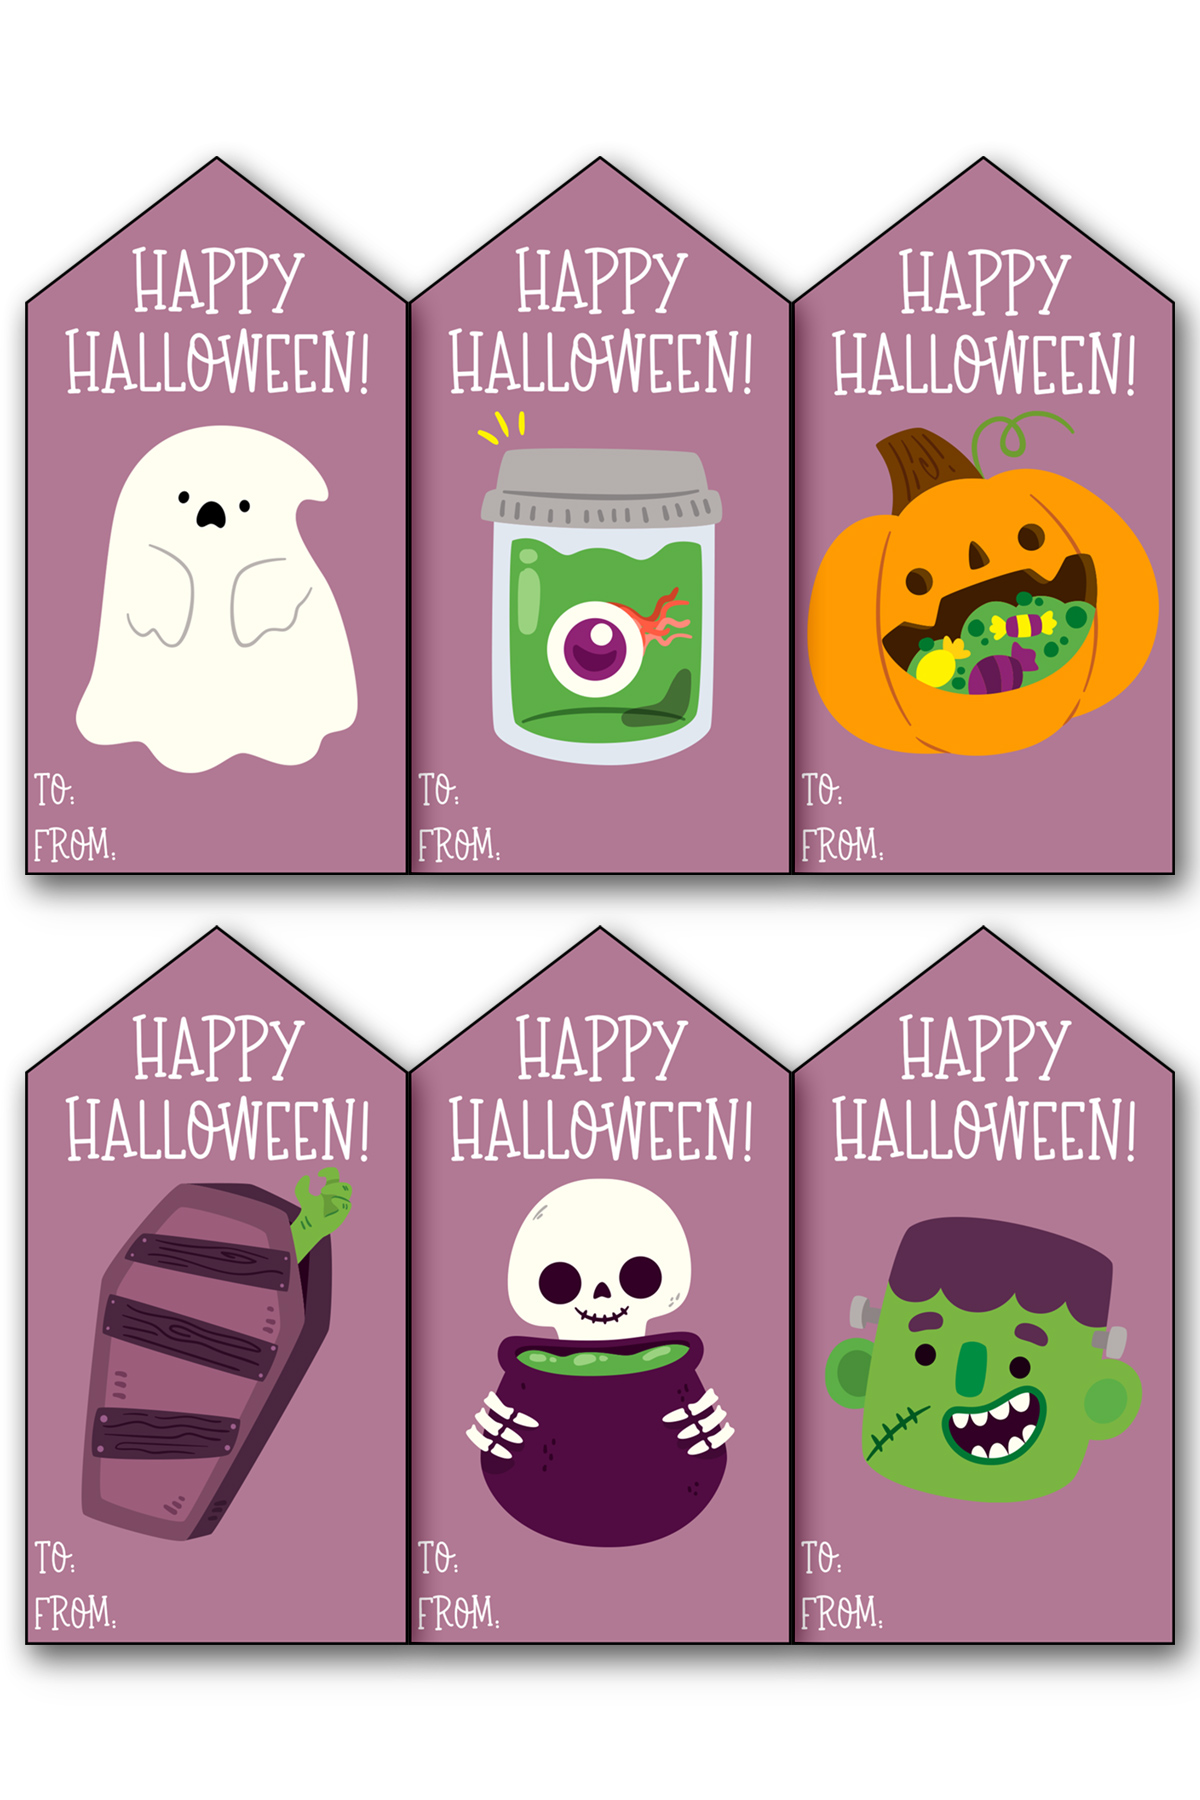 This image shows one of the 17 free sheets of free Happy Halloween printable tags you can download for free in this blog post.